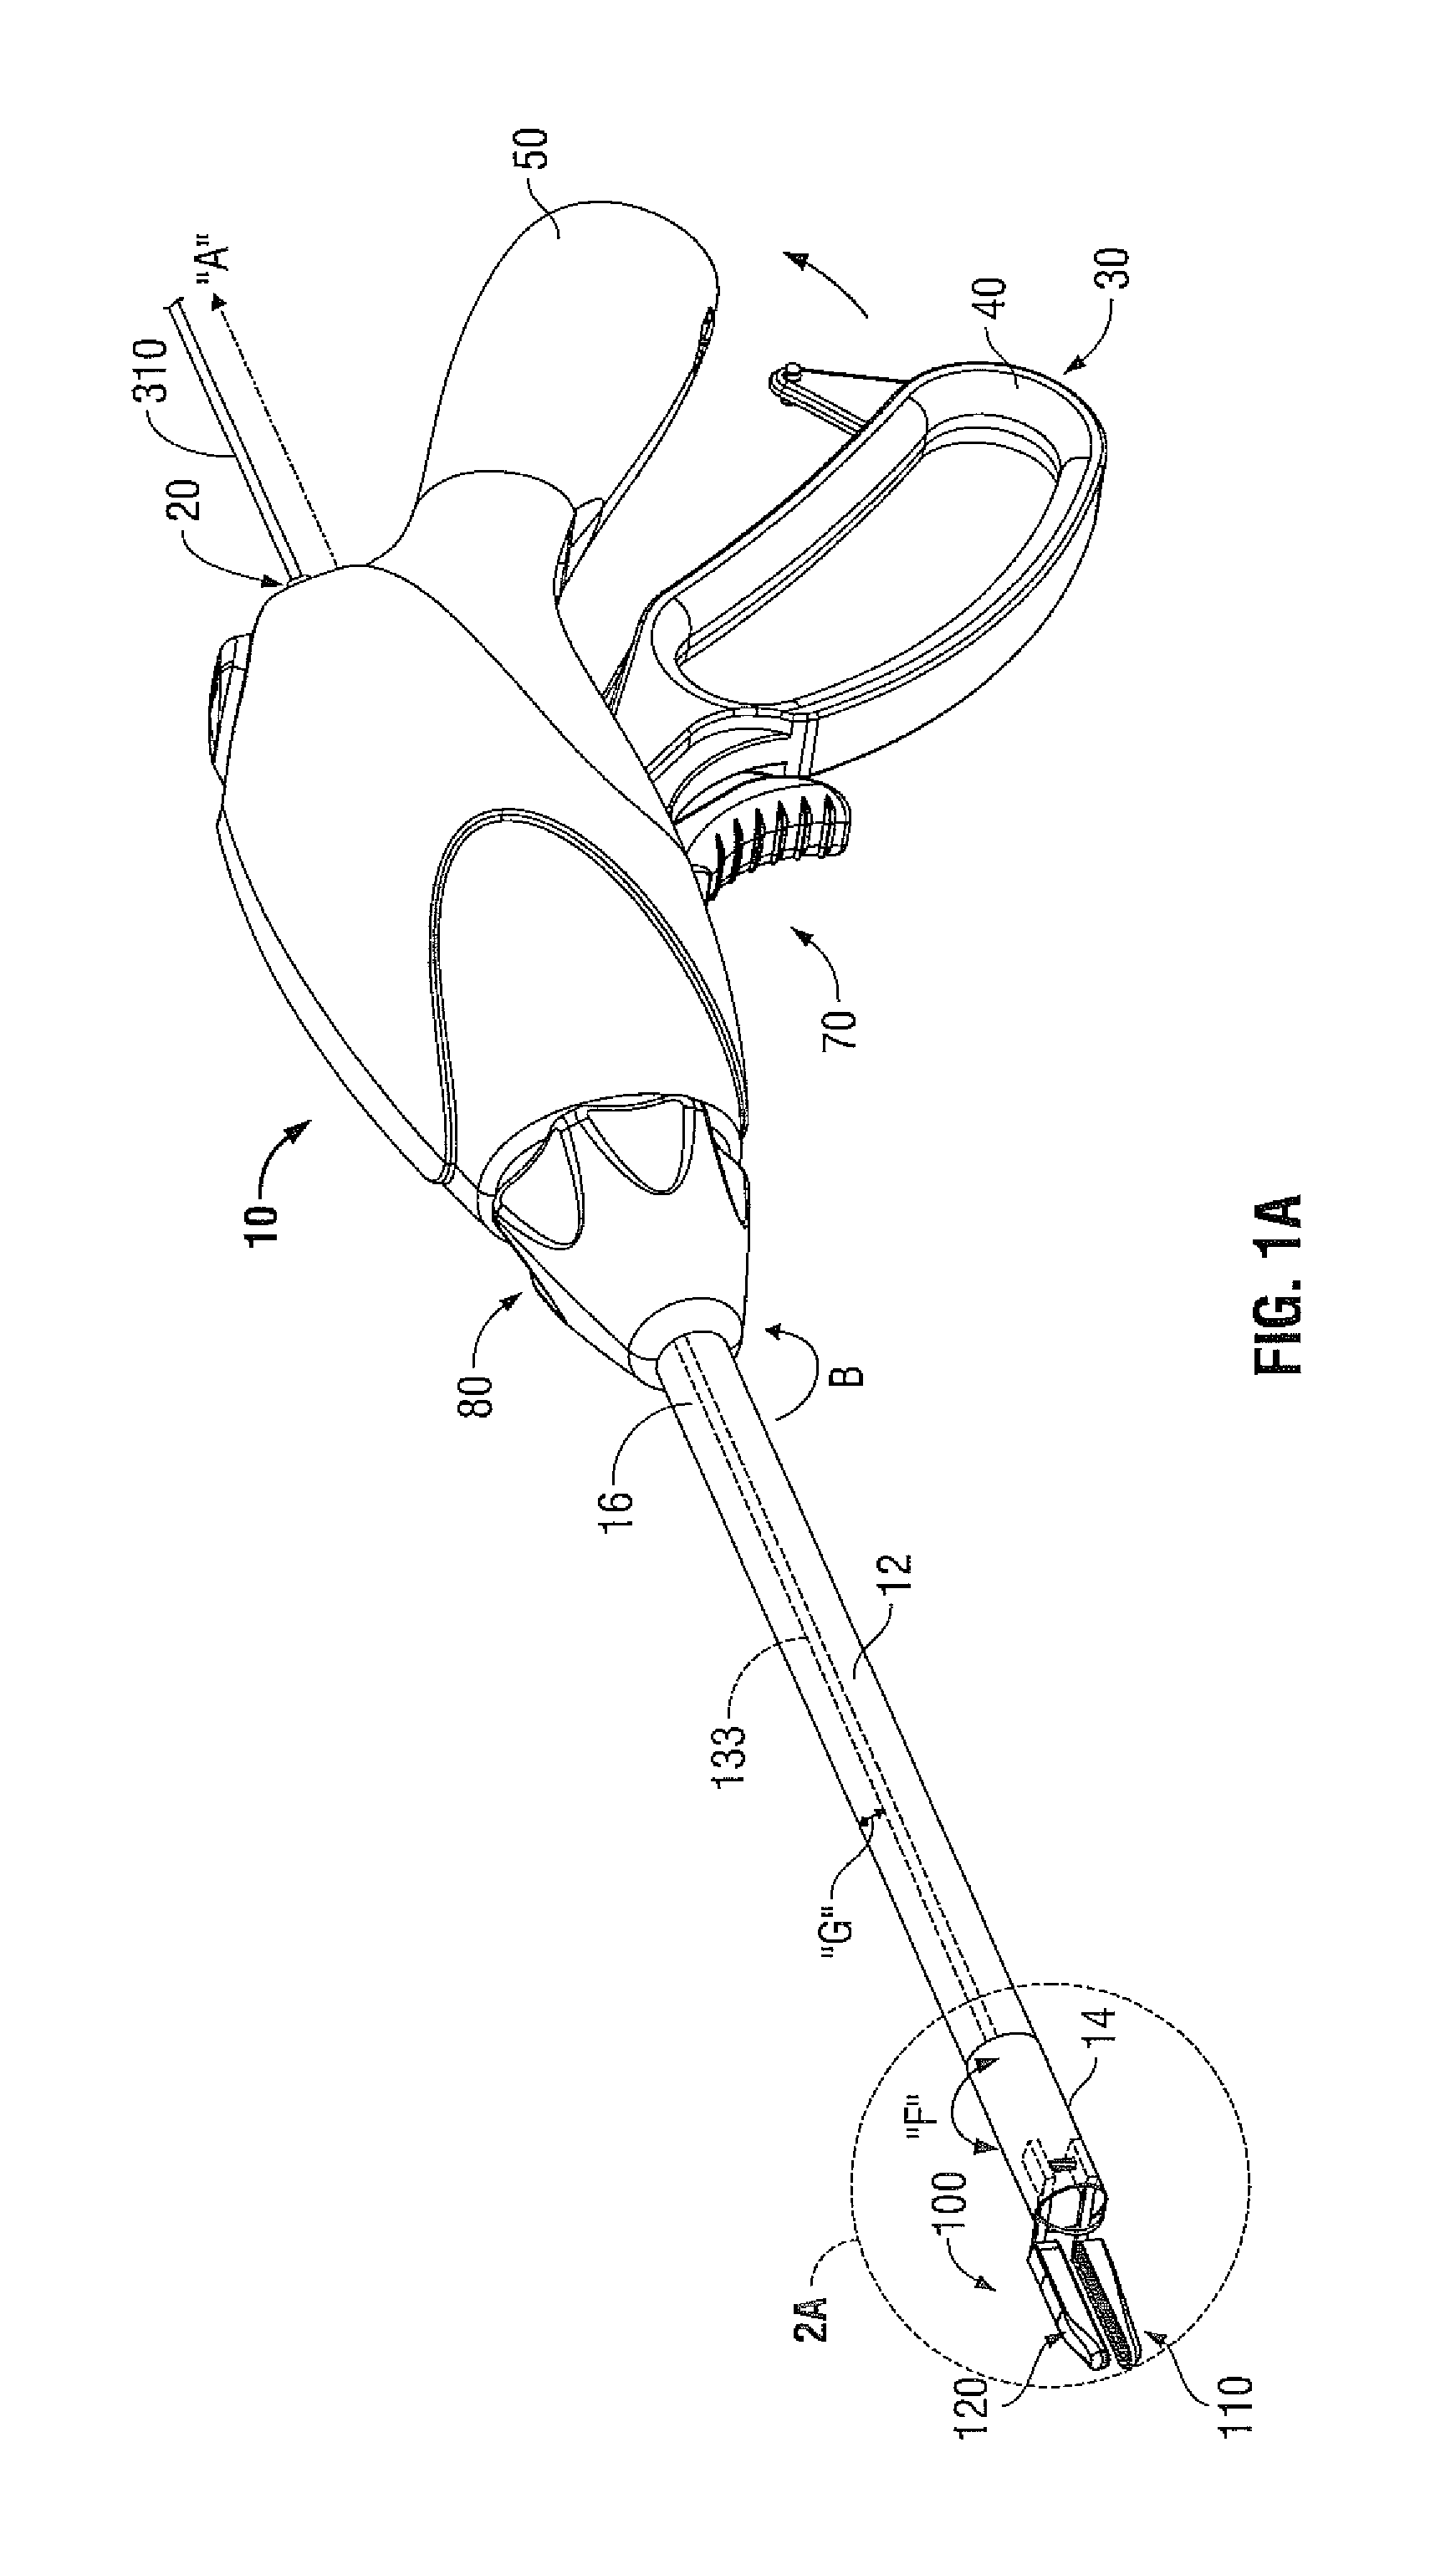 Apparatus for performing an electrosurgical procedure